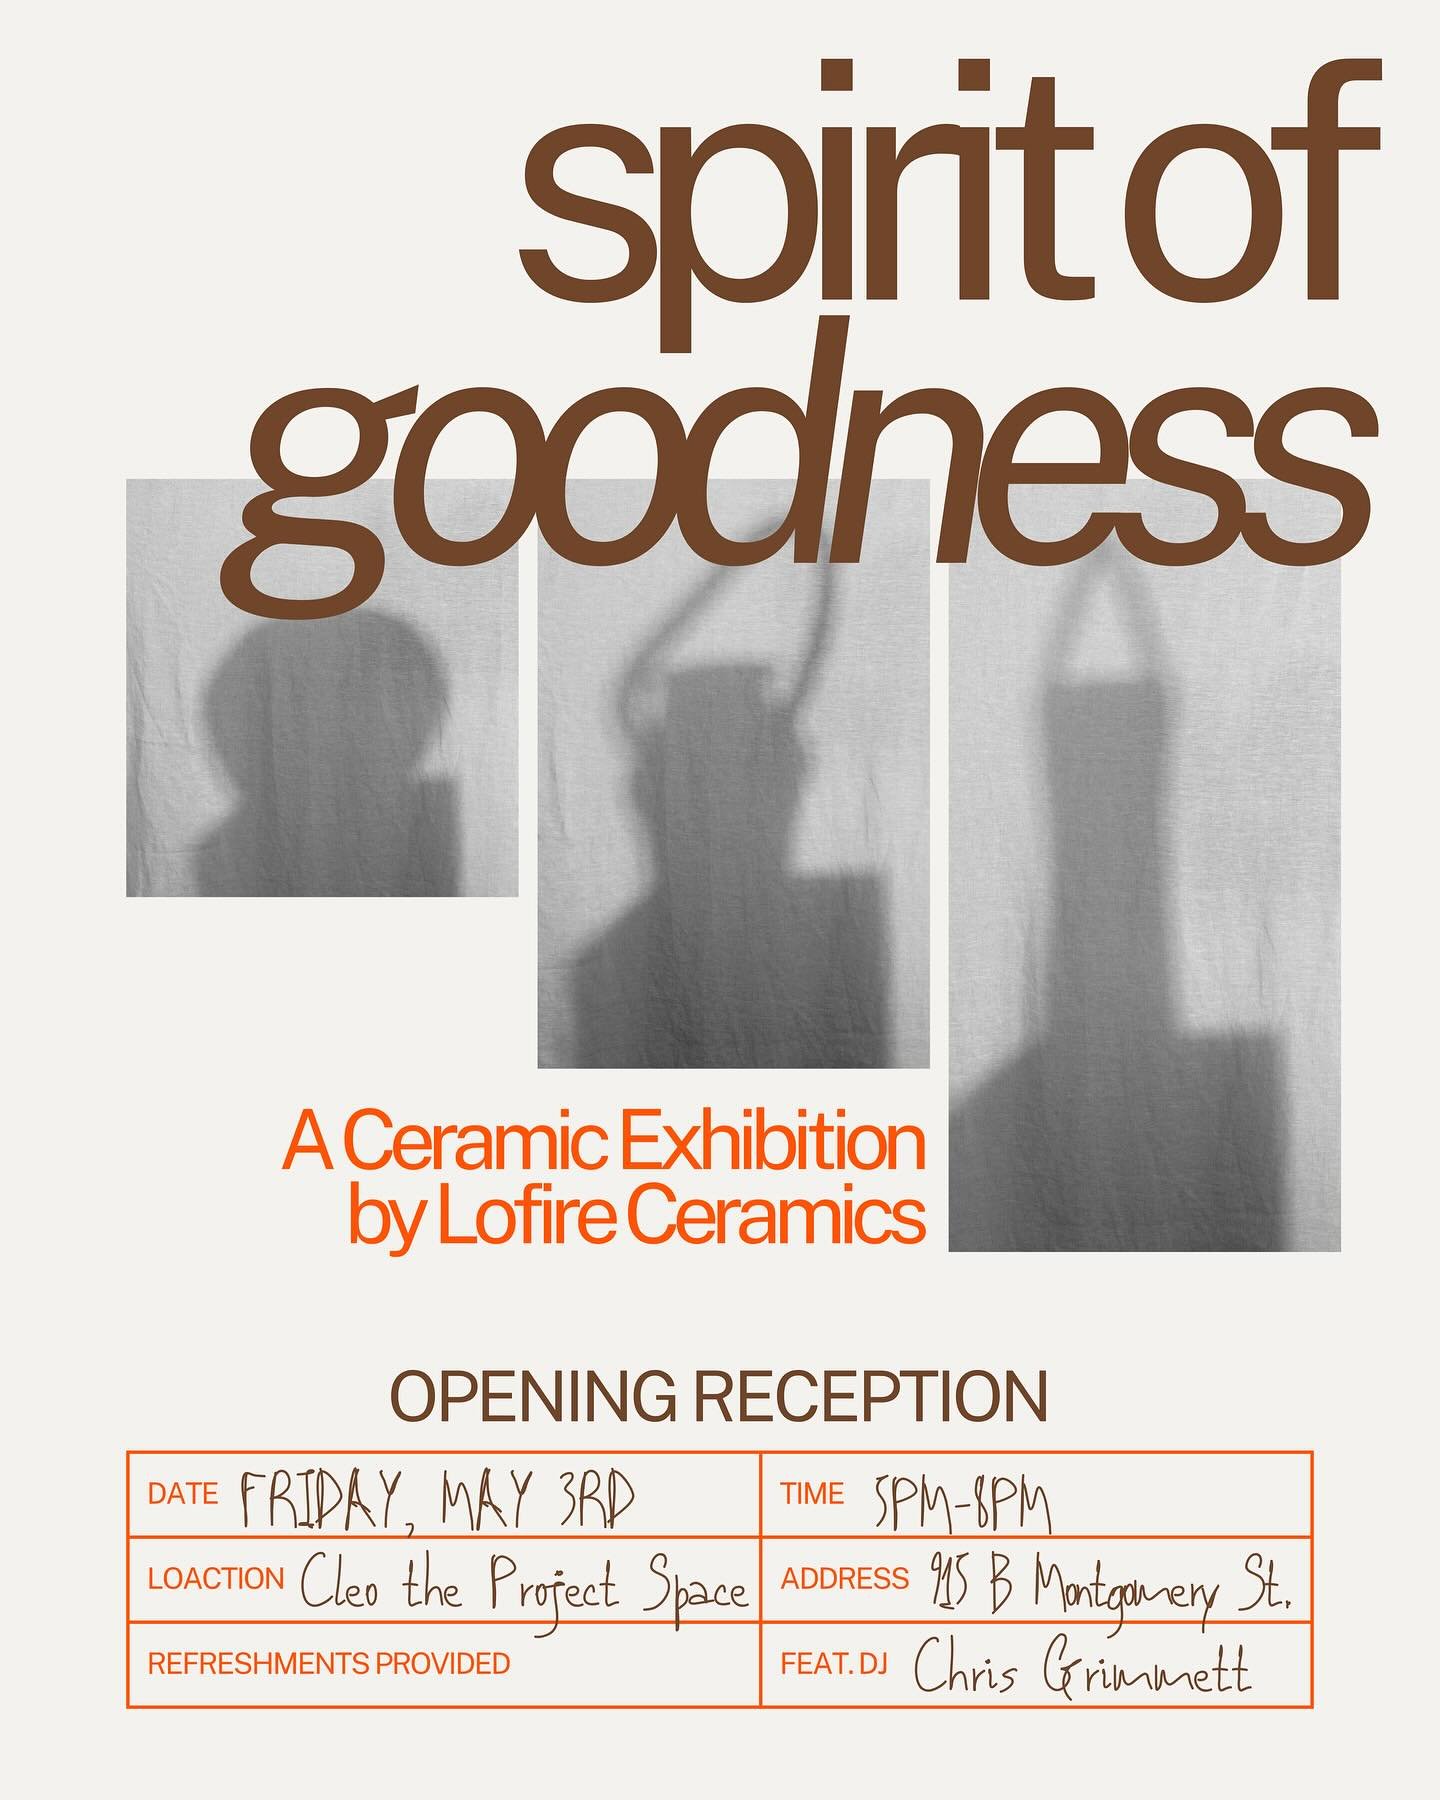 My first exhibition, &ldquo;The Spirit of Goodness,&rdquo; will be on display at @cleo_the_project_space from May 3-5. The opening reception will be held next Friday, May 3rd from 5:00-8:00 PM. 

I am beyond excited to share what I have been working 